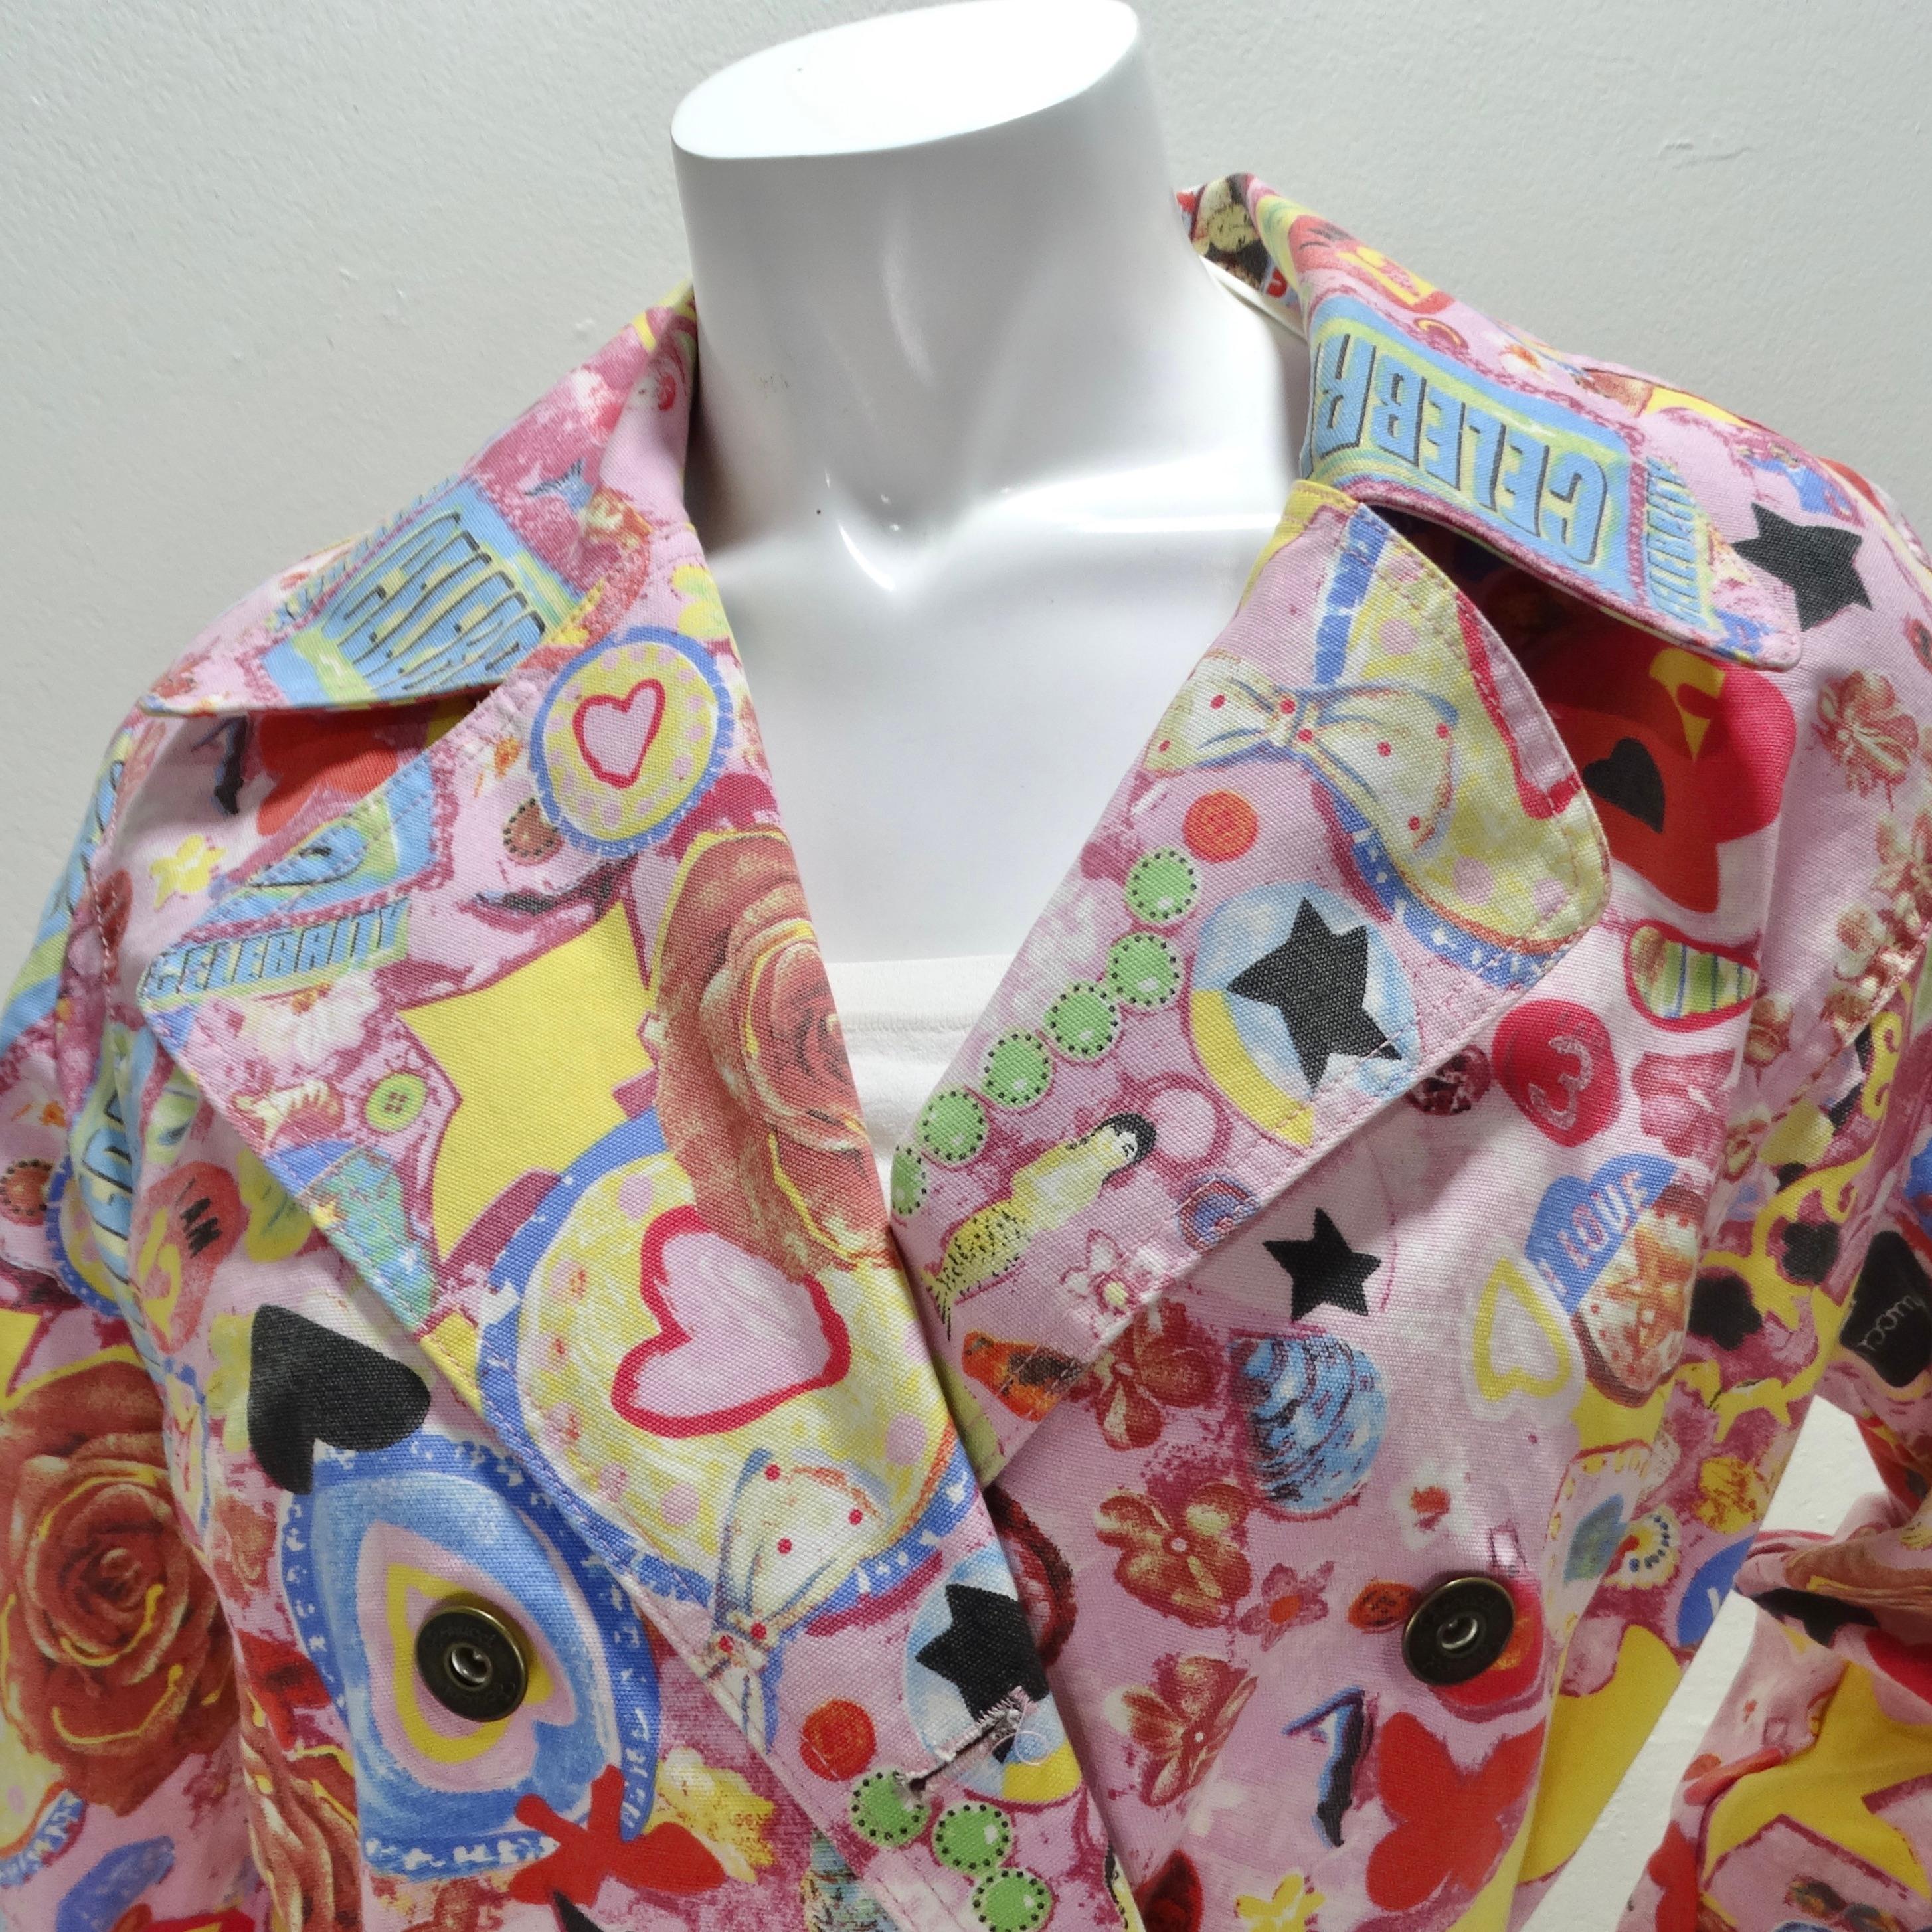 Do not miss out on a trench coat that's not just an outerwear, but a work of art - the Fiorucci Y2K Multicolor Graphic Printed Trench Coat in playful pink. This trench coat features a collar, buttons down the front, adjustable buckles at the